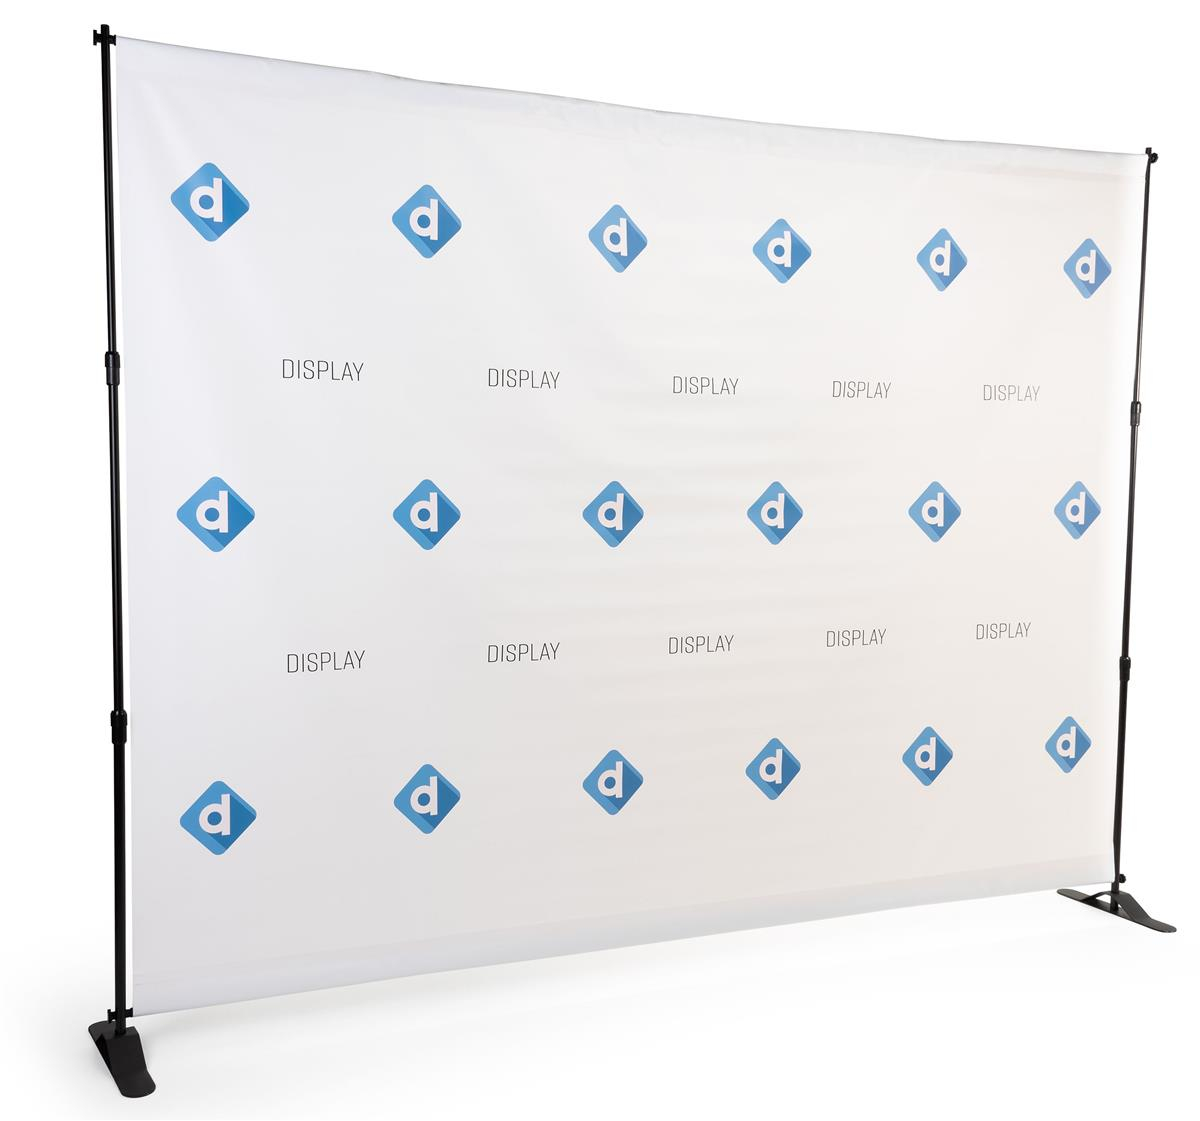 Custom Step And Repeat Banner For BWALL10 Regarding Step And Repeat Banner Template